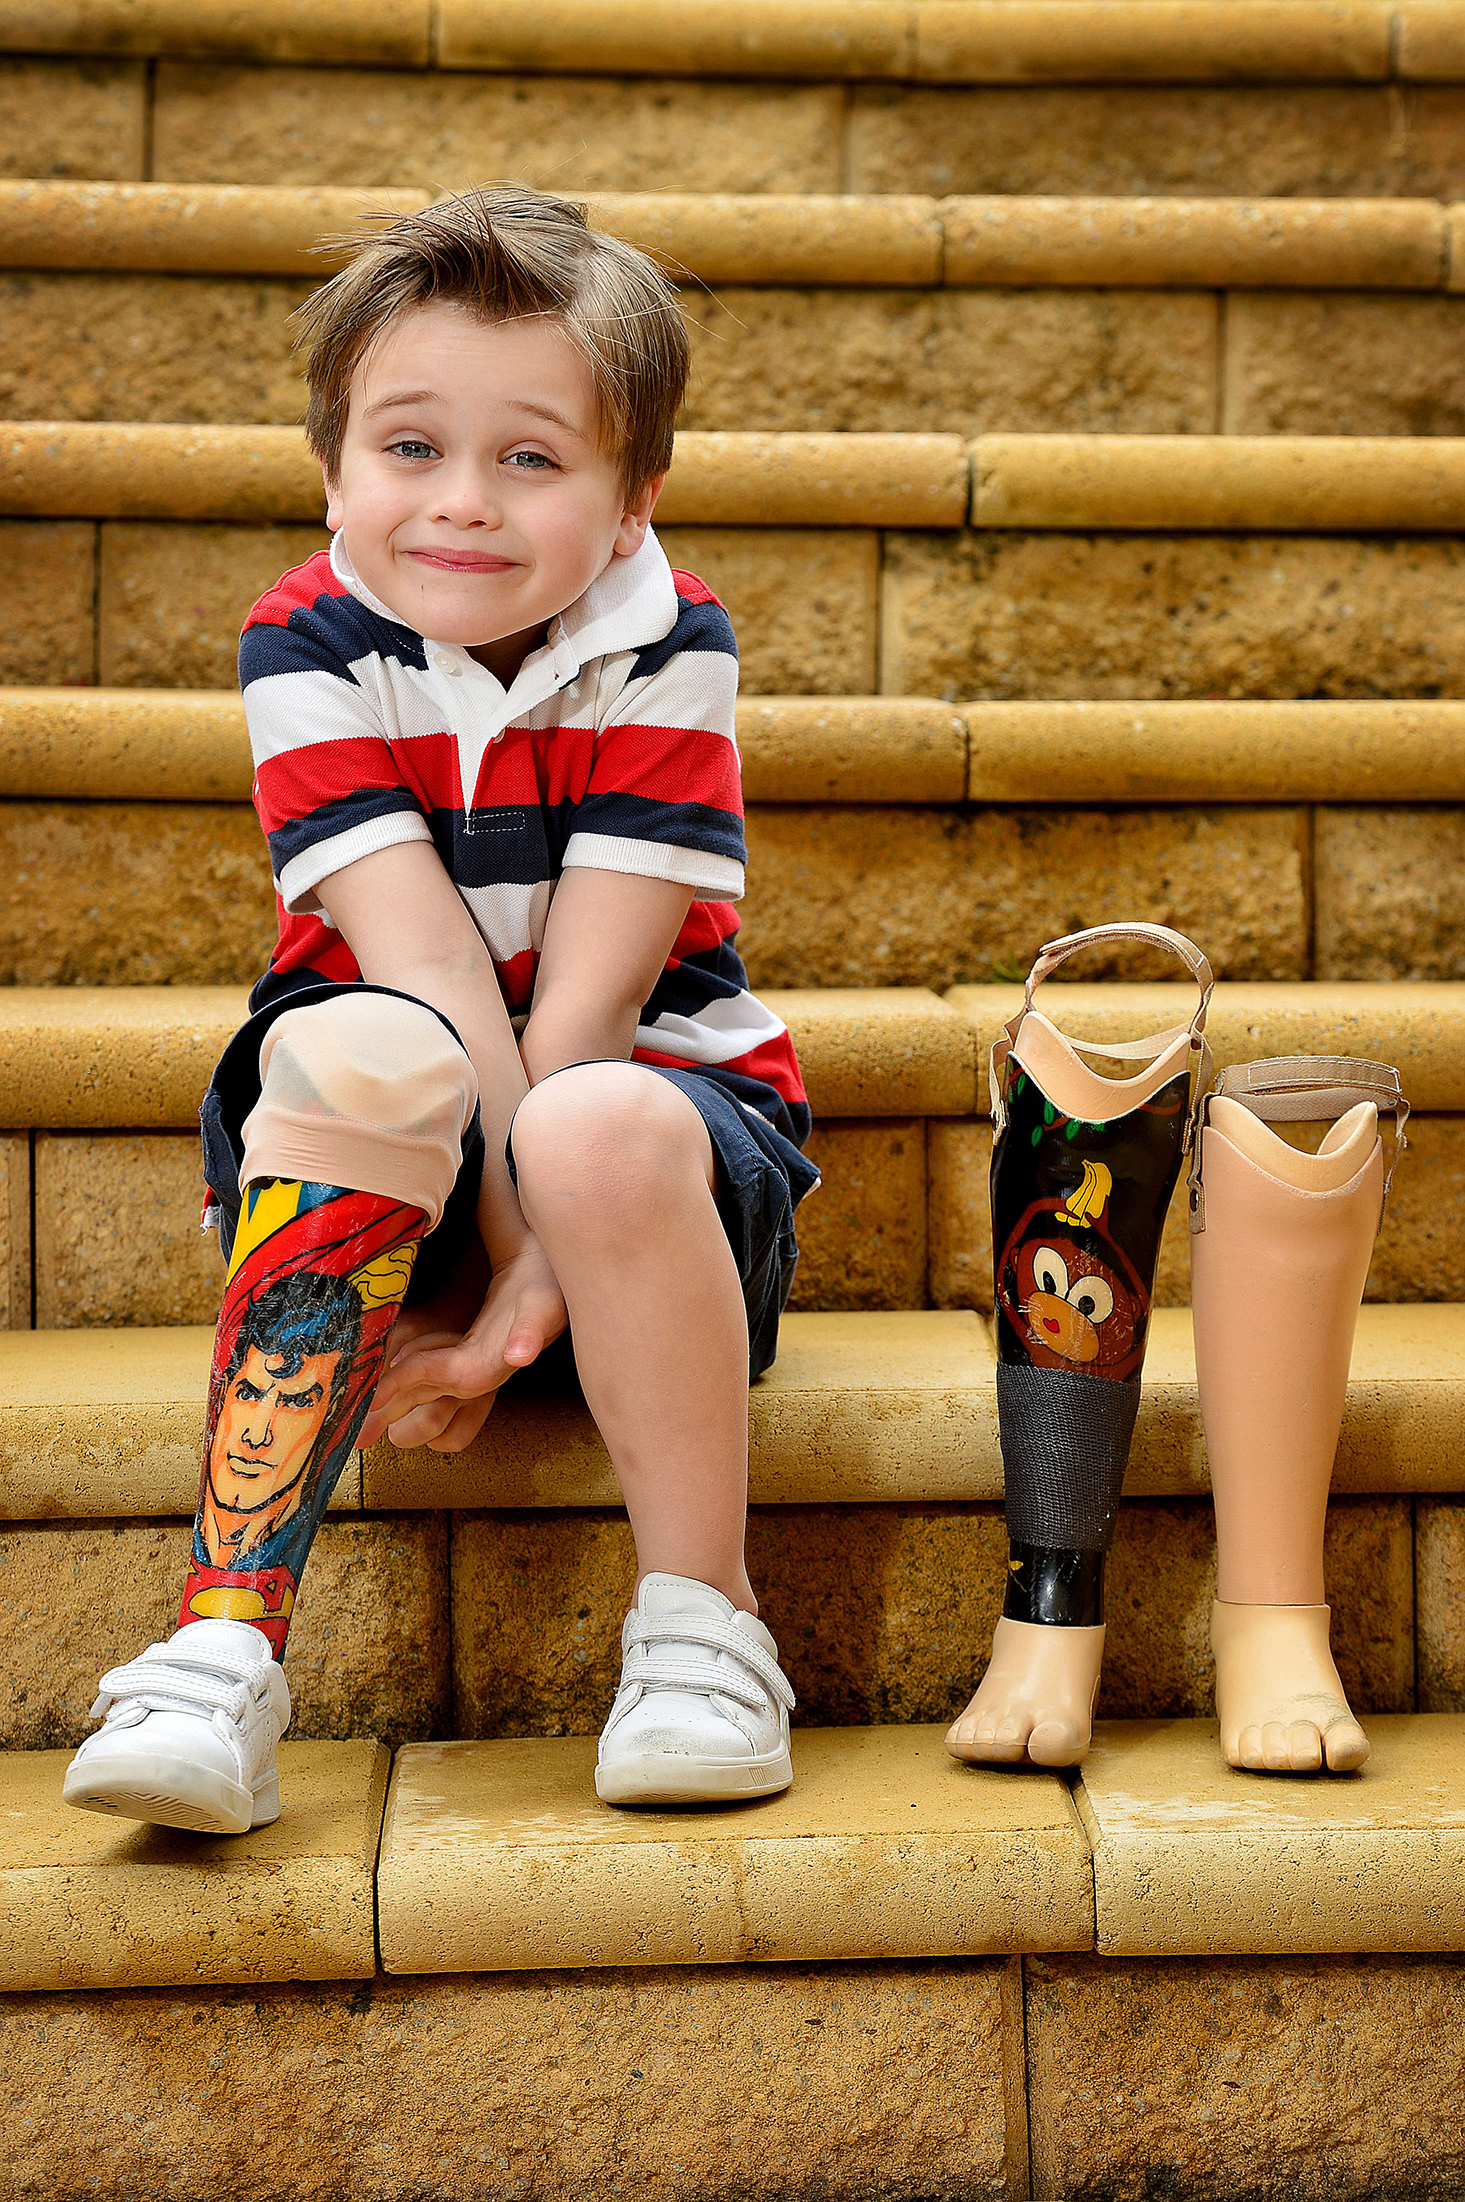  29.8.16 - William White (5) proudly shows off his prosthetic legs at his family's Craigburn Farm home. When William was 2, he was hit by a falling branch in a public park, during February 2014's heat wave. He spent time in ICU and had one of his leg